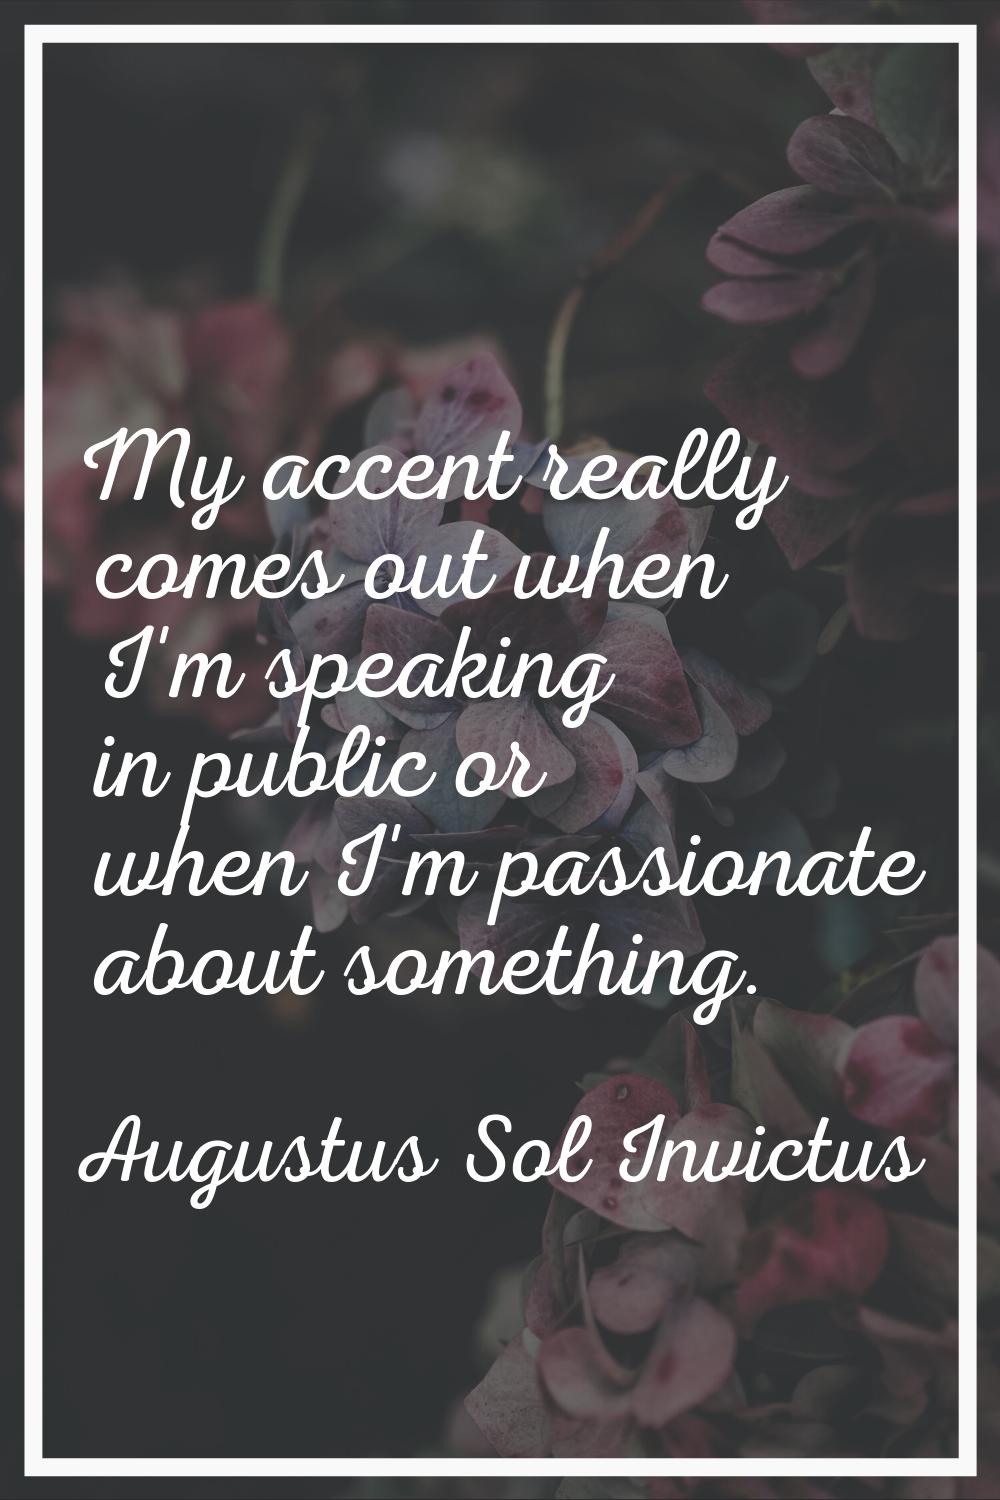 My accent really comes out when I'm speaking in public or when I'm passionate about something.